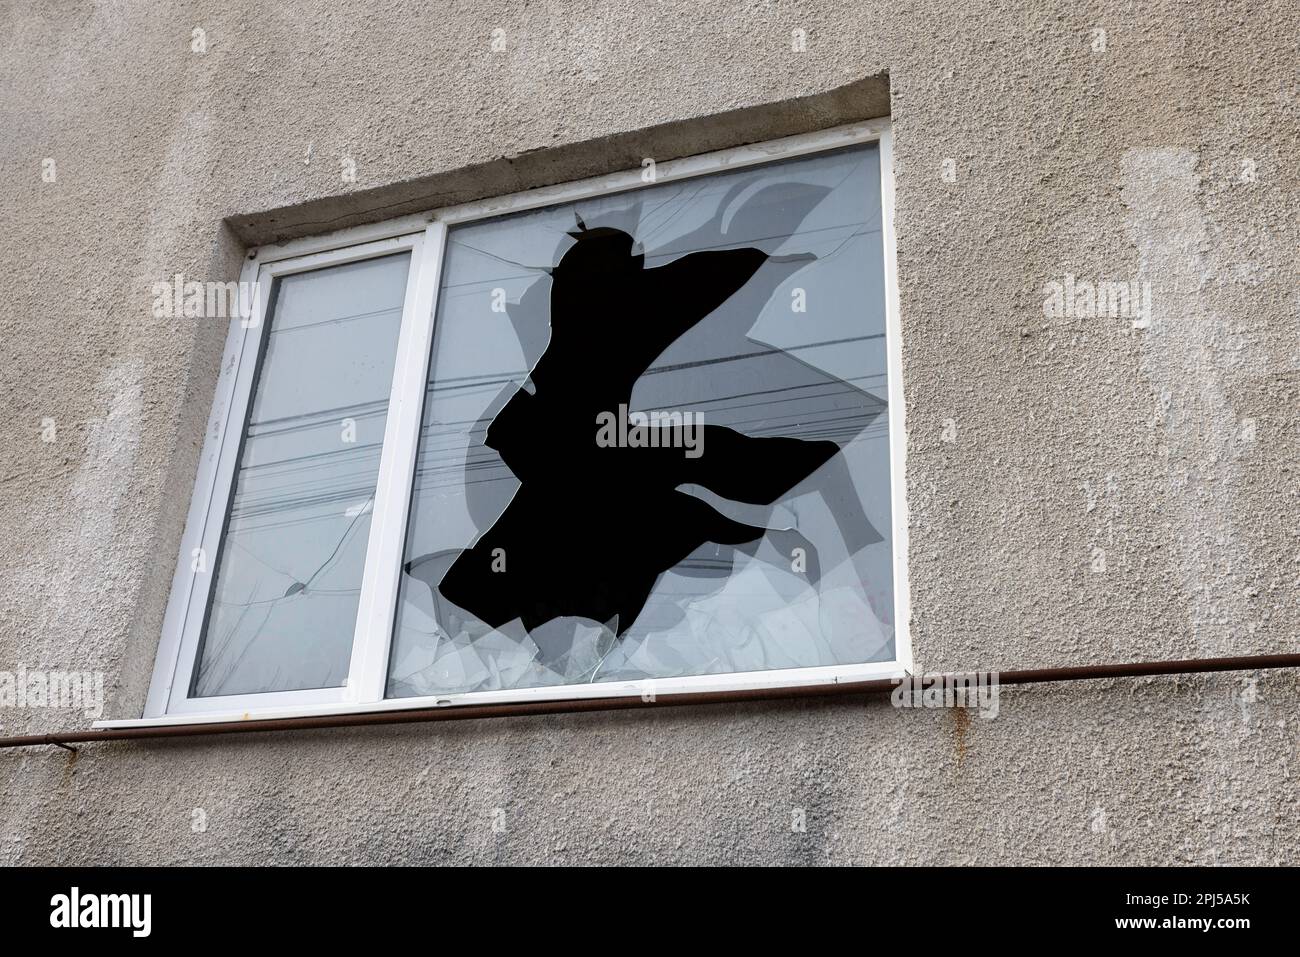 bullet hole in glass is a real bullet hole of a large caliber projectile bullet. Glass door pierced by a bullet during the war, terrorist attack. Brok Stock Photo